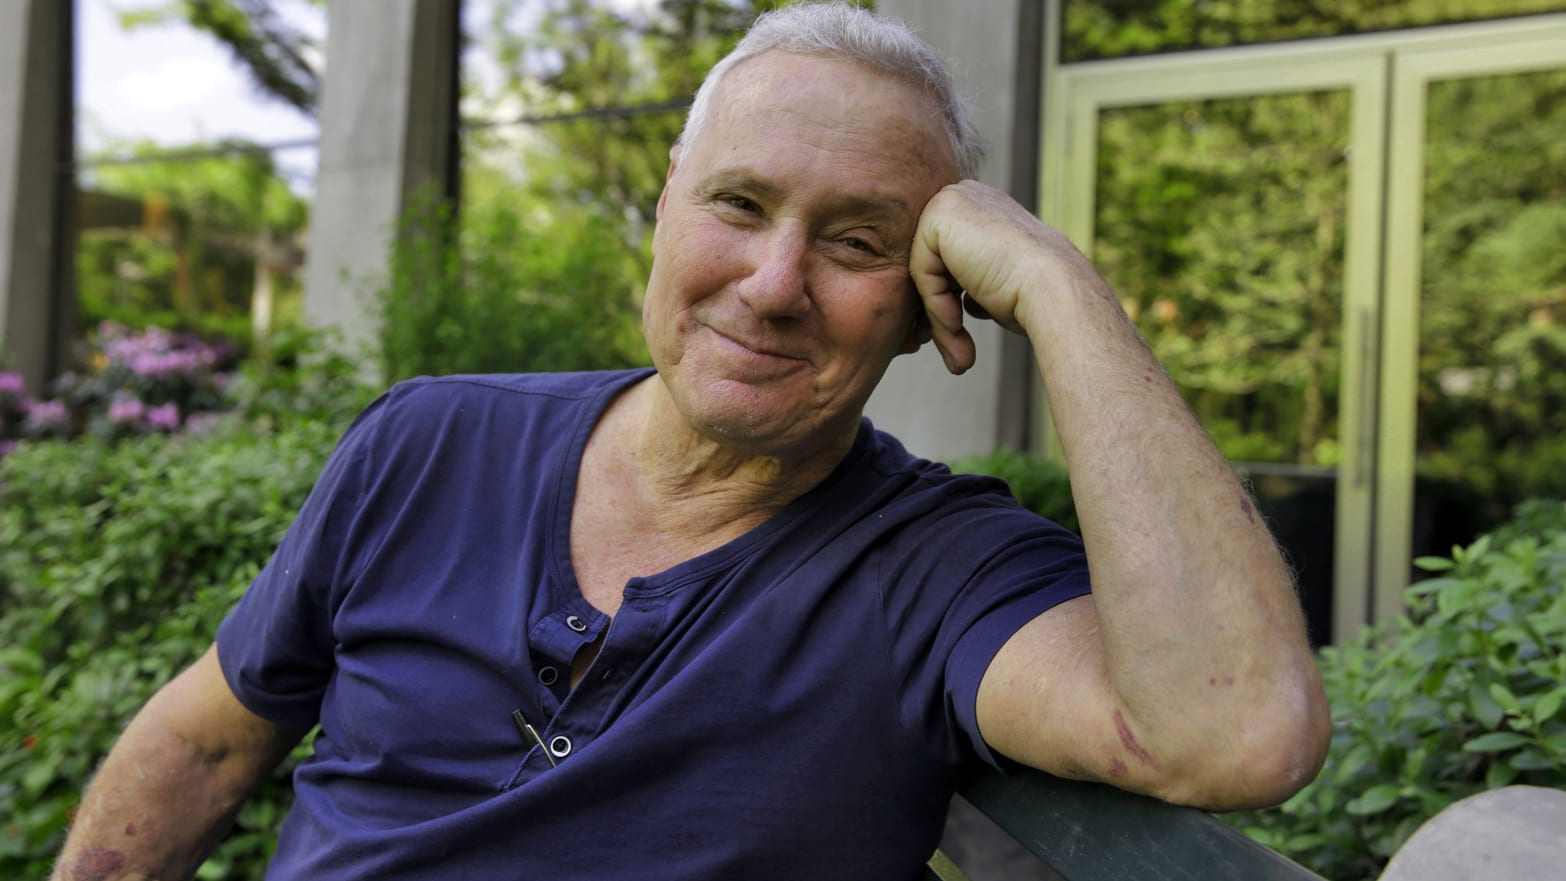 From Studio 54 to Hotel Glory Via Jail: Inside Ian Schrager’s Long Life of Cool